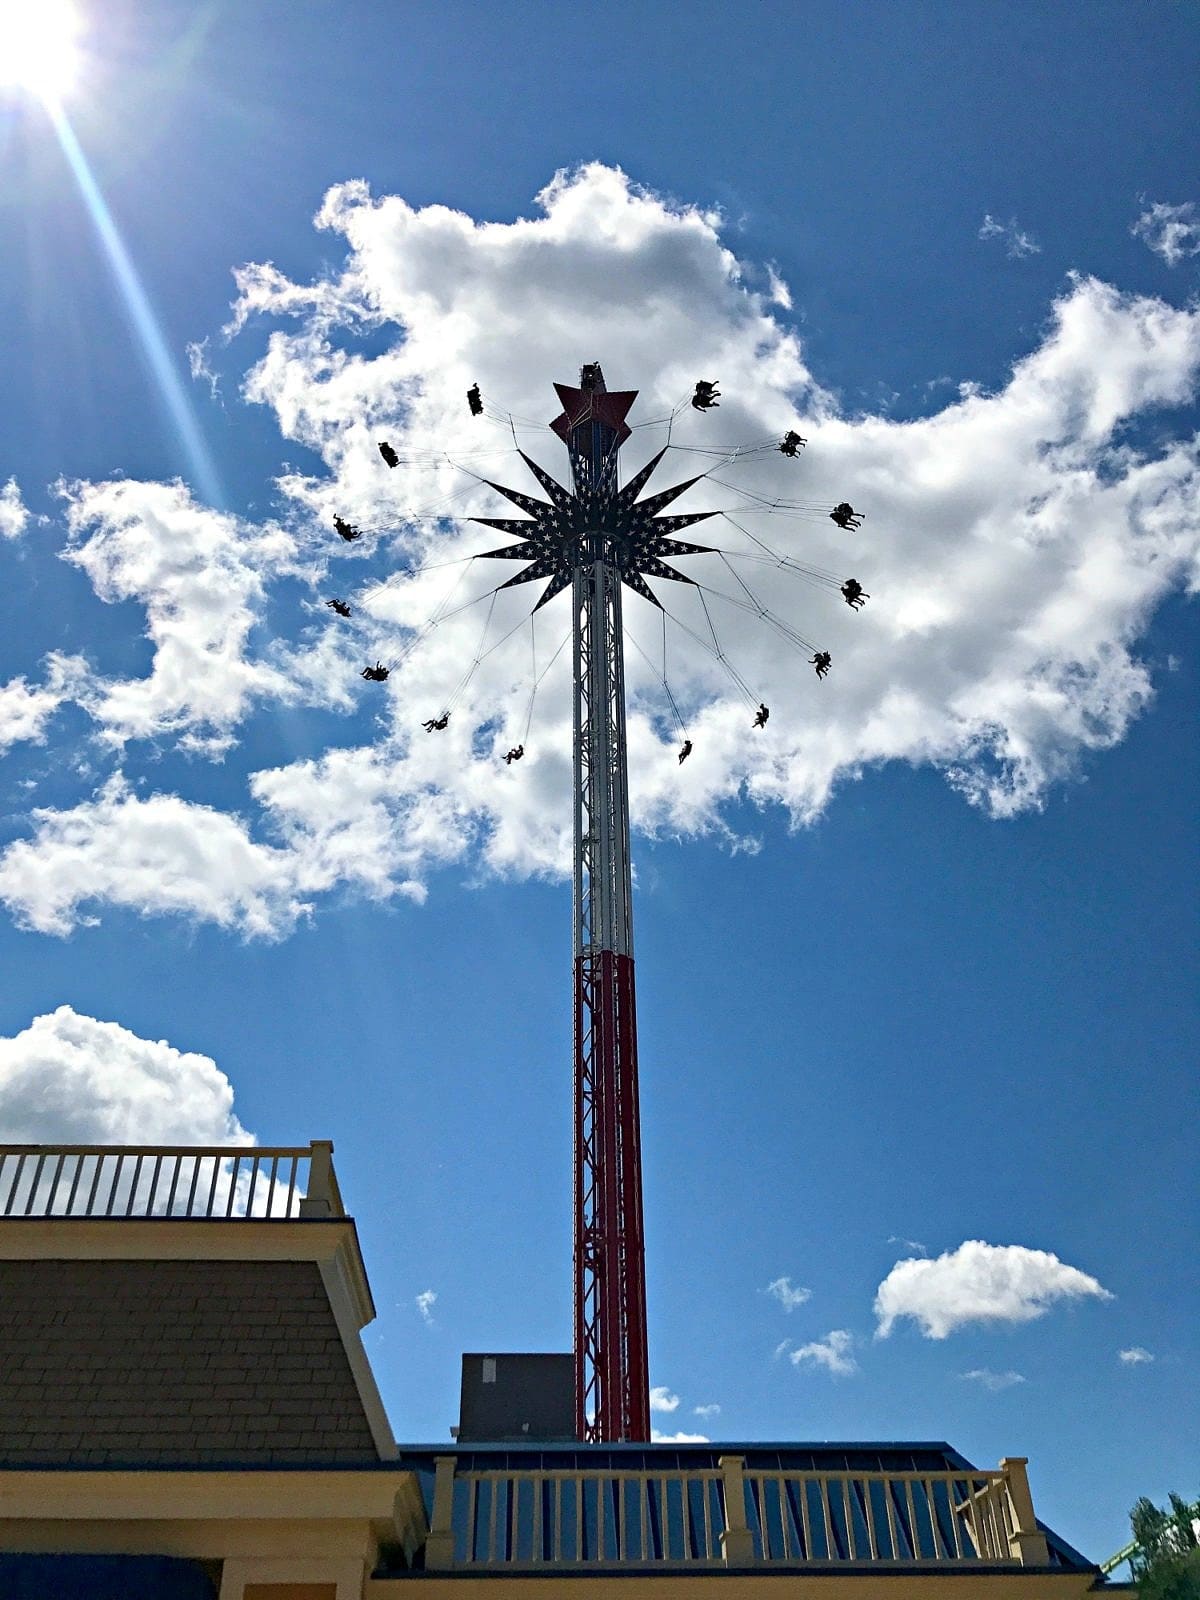 North Star opened in 2017 at Valleyfair 